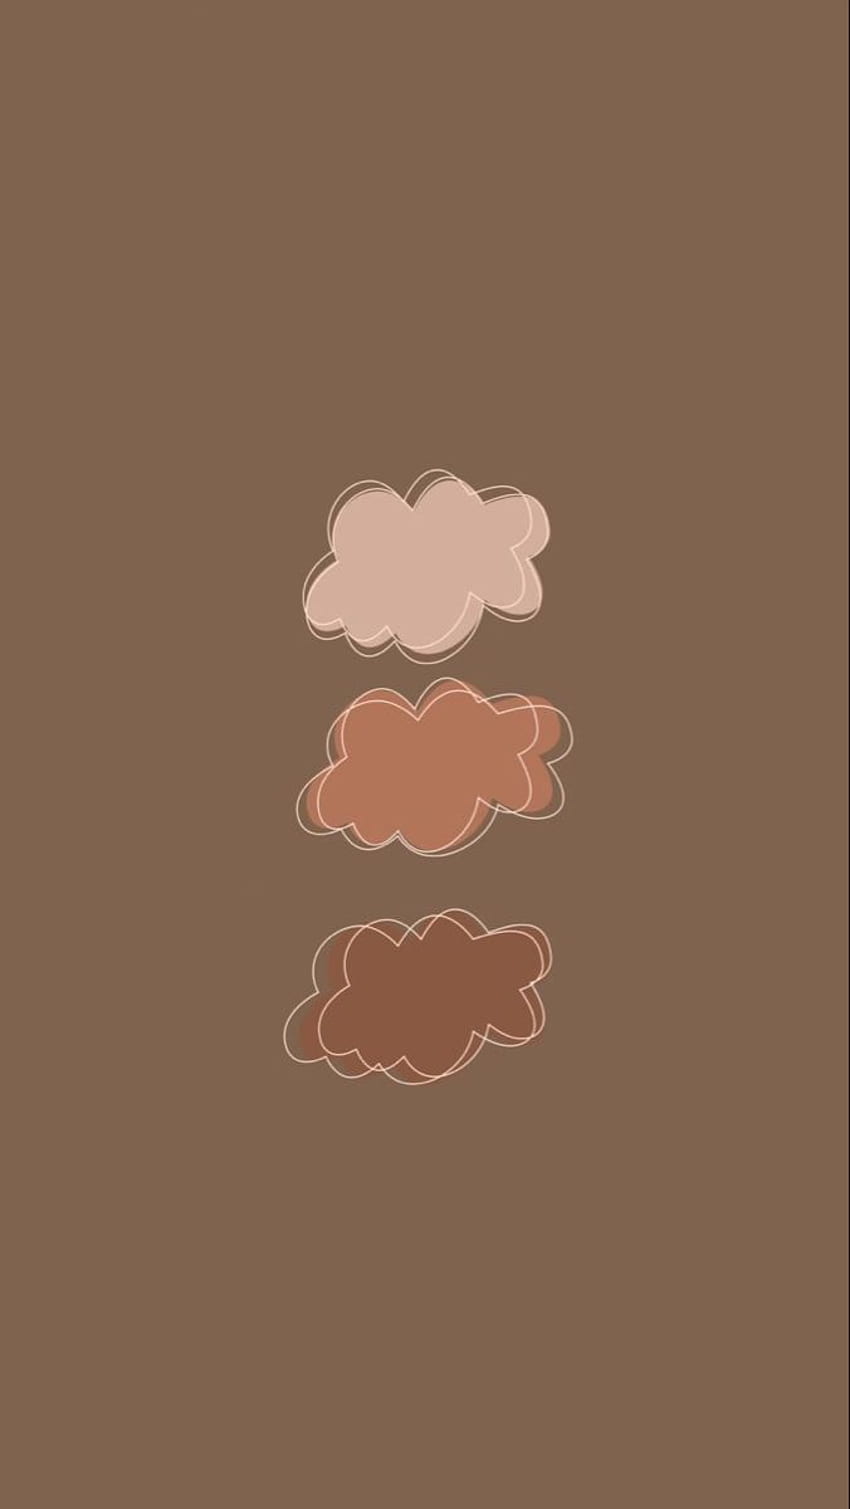 Three clouds on a brown background - Brown